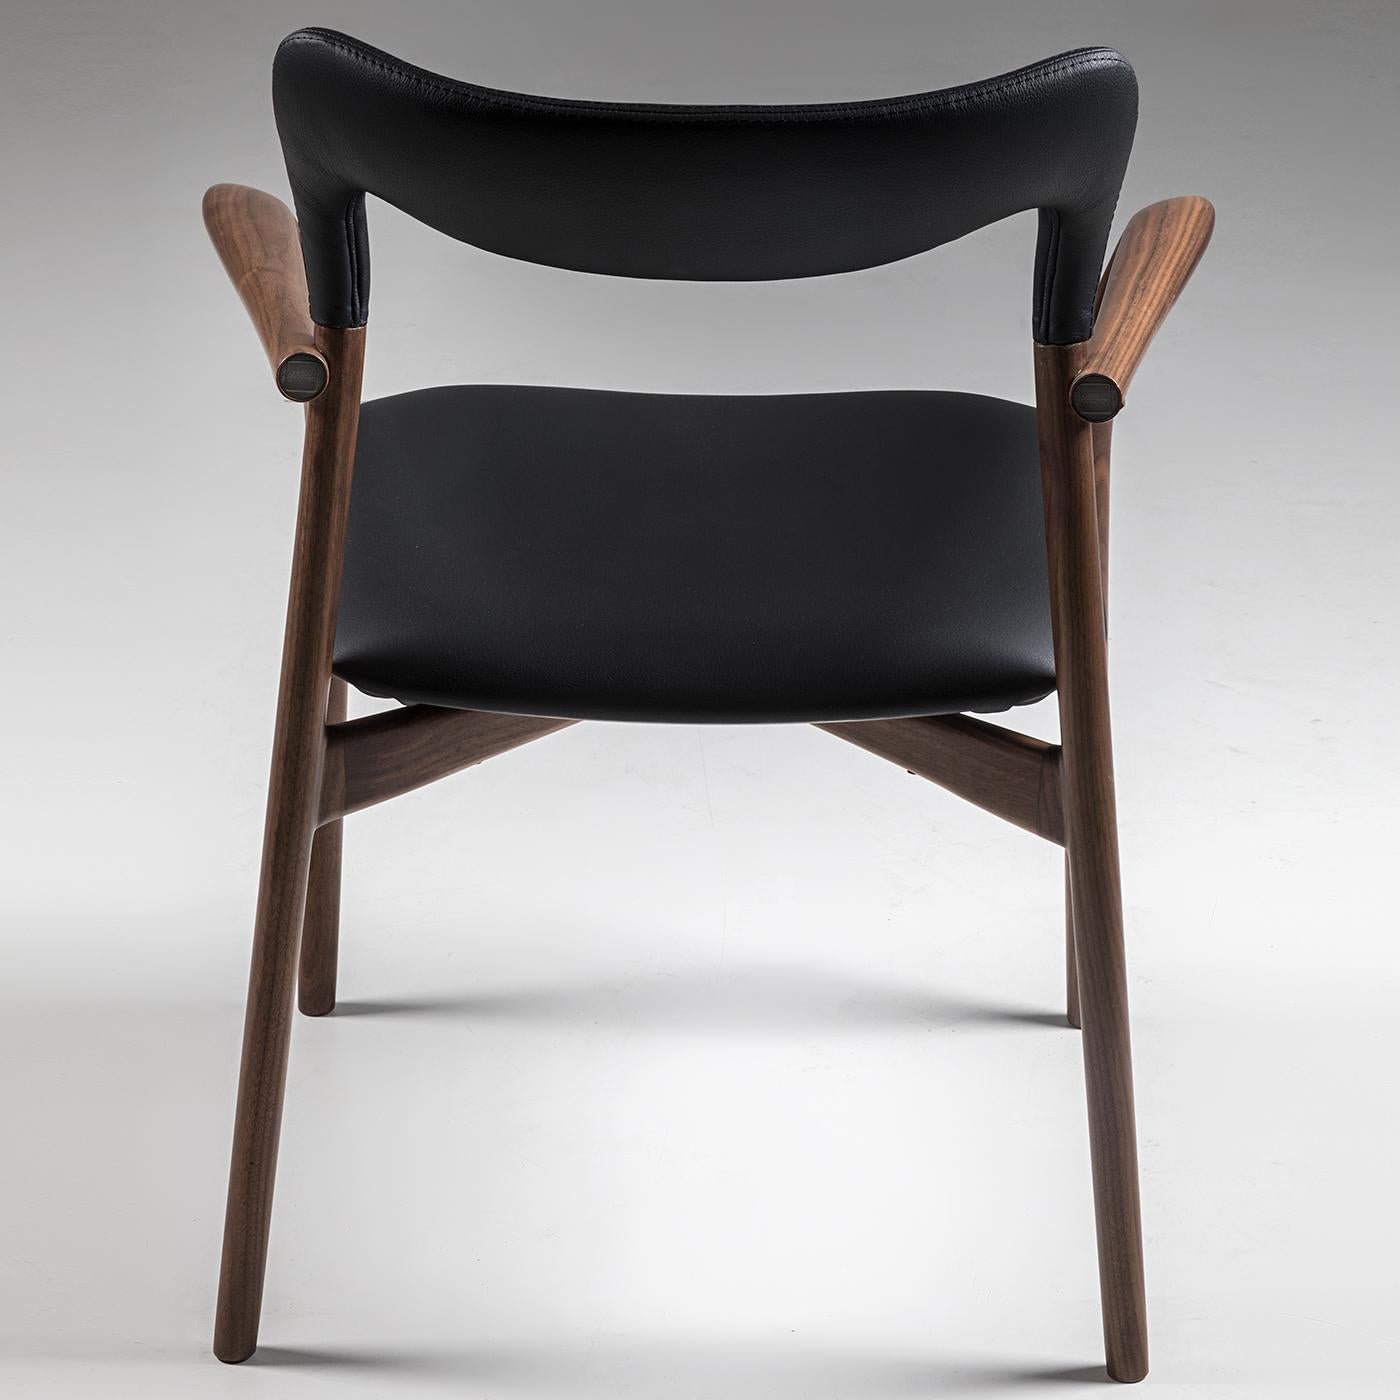 Rising above any design trend, this armchair will make a statement in any interior decor, with its graceful lines and rounded edges highlighting the exquisite craftsmanship that characterizes the Kong Collection. Entirely crafted of dark-stained